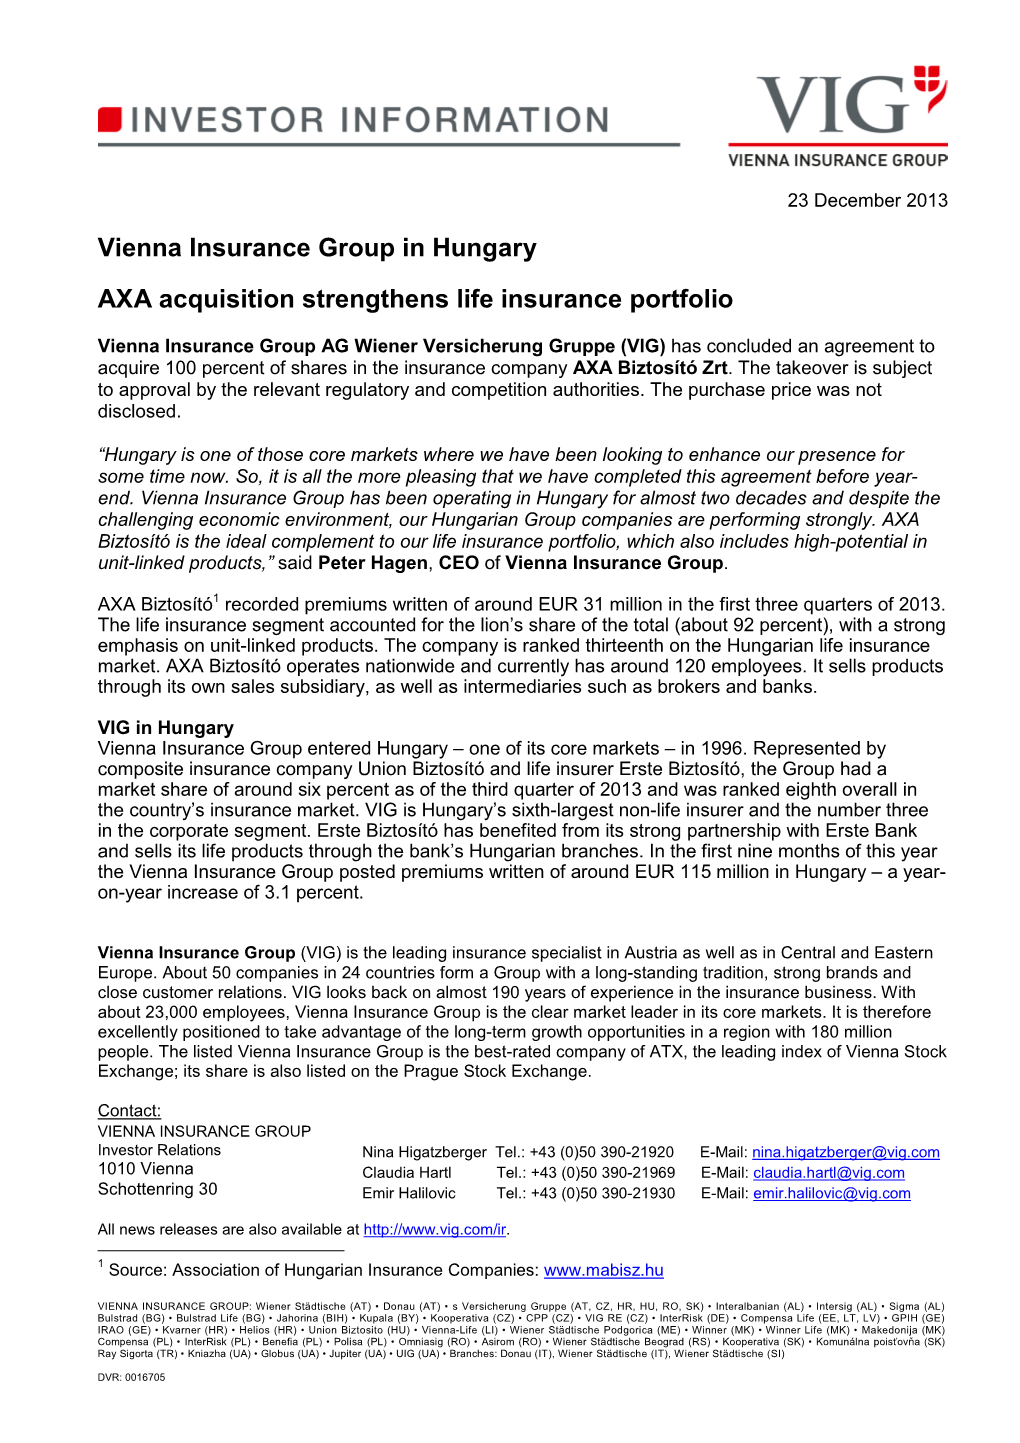 Vienna Insurance Group in Hungary AXA Acquisition Strengthens Life